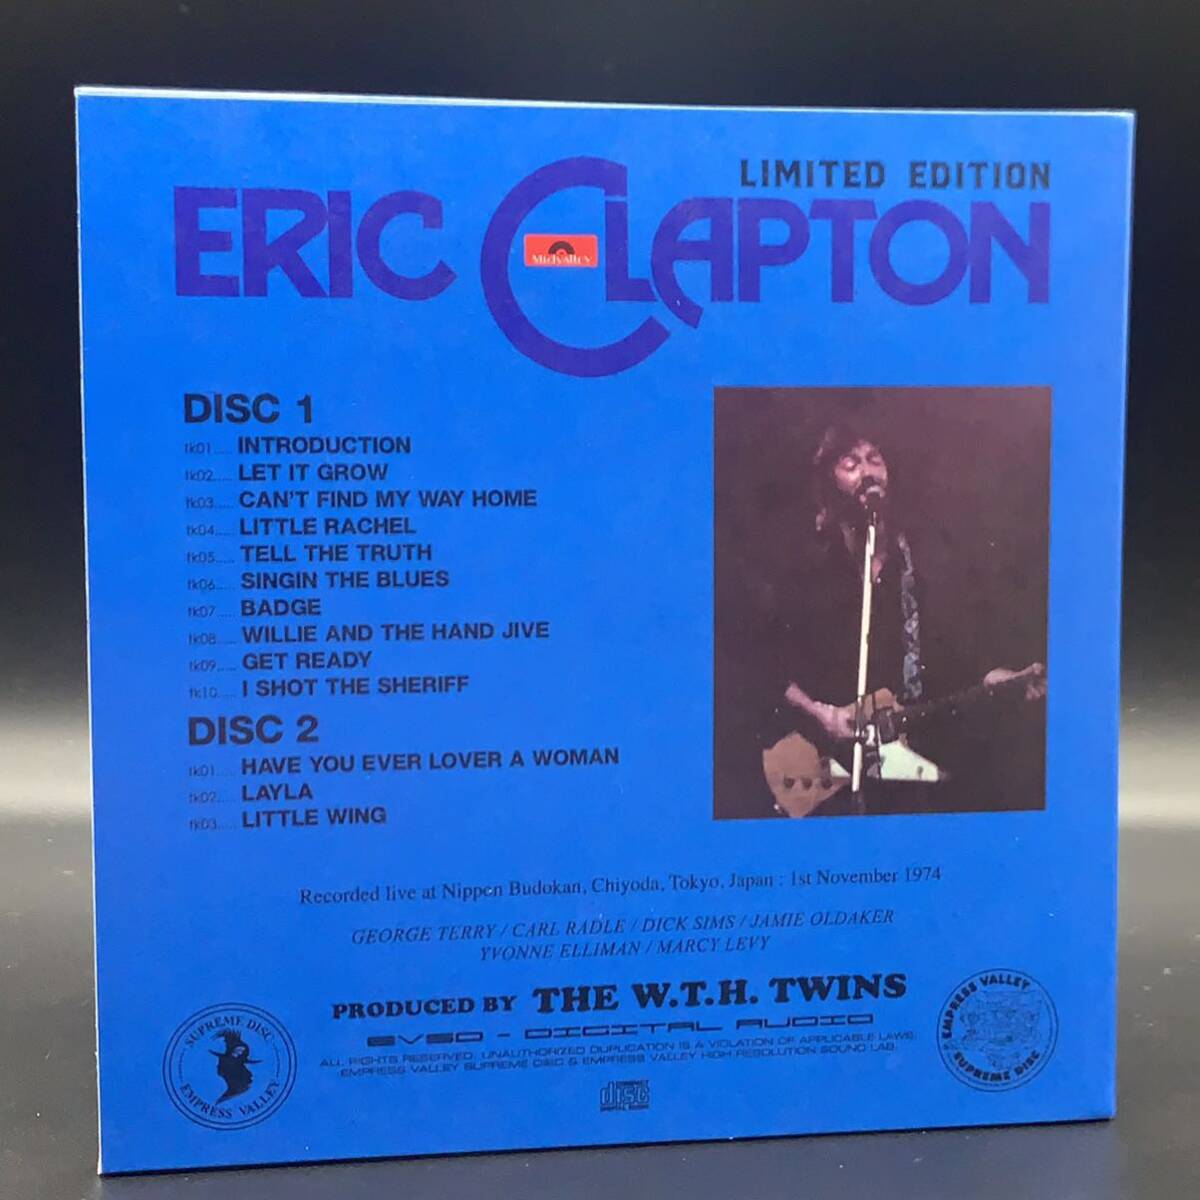 ERIC CLAPTON / TROPICAL SOUND SHOWER「亜熱帯武道館」(6CD BOX with Booklet) 初来日武道館3公演を全て初登場音源で収録の凄いやつ！残少の画像6